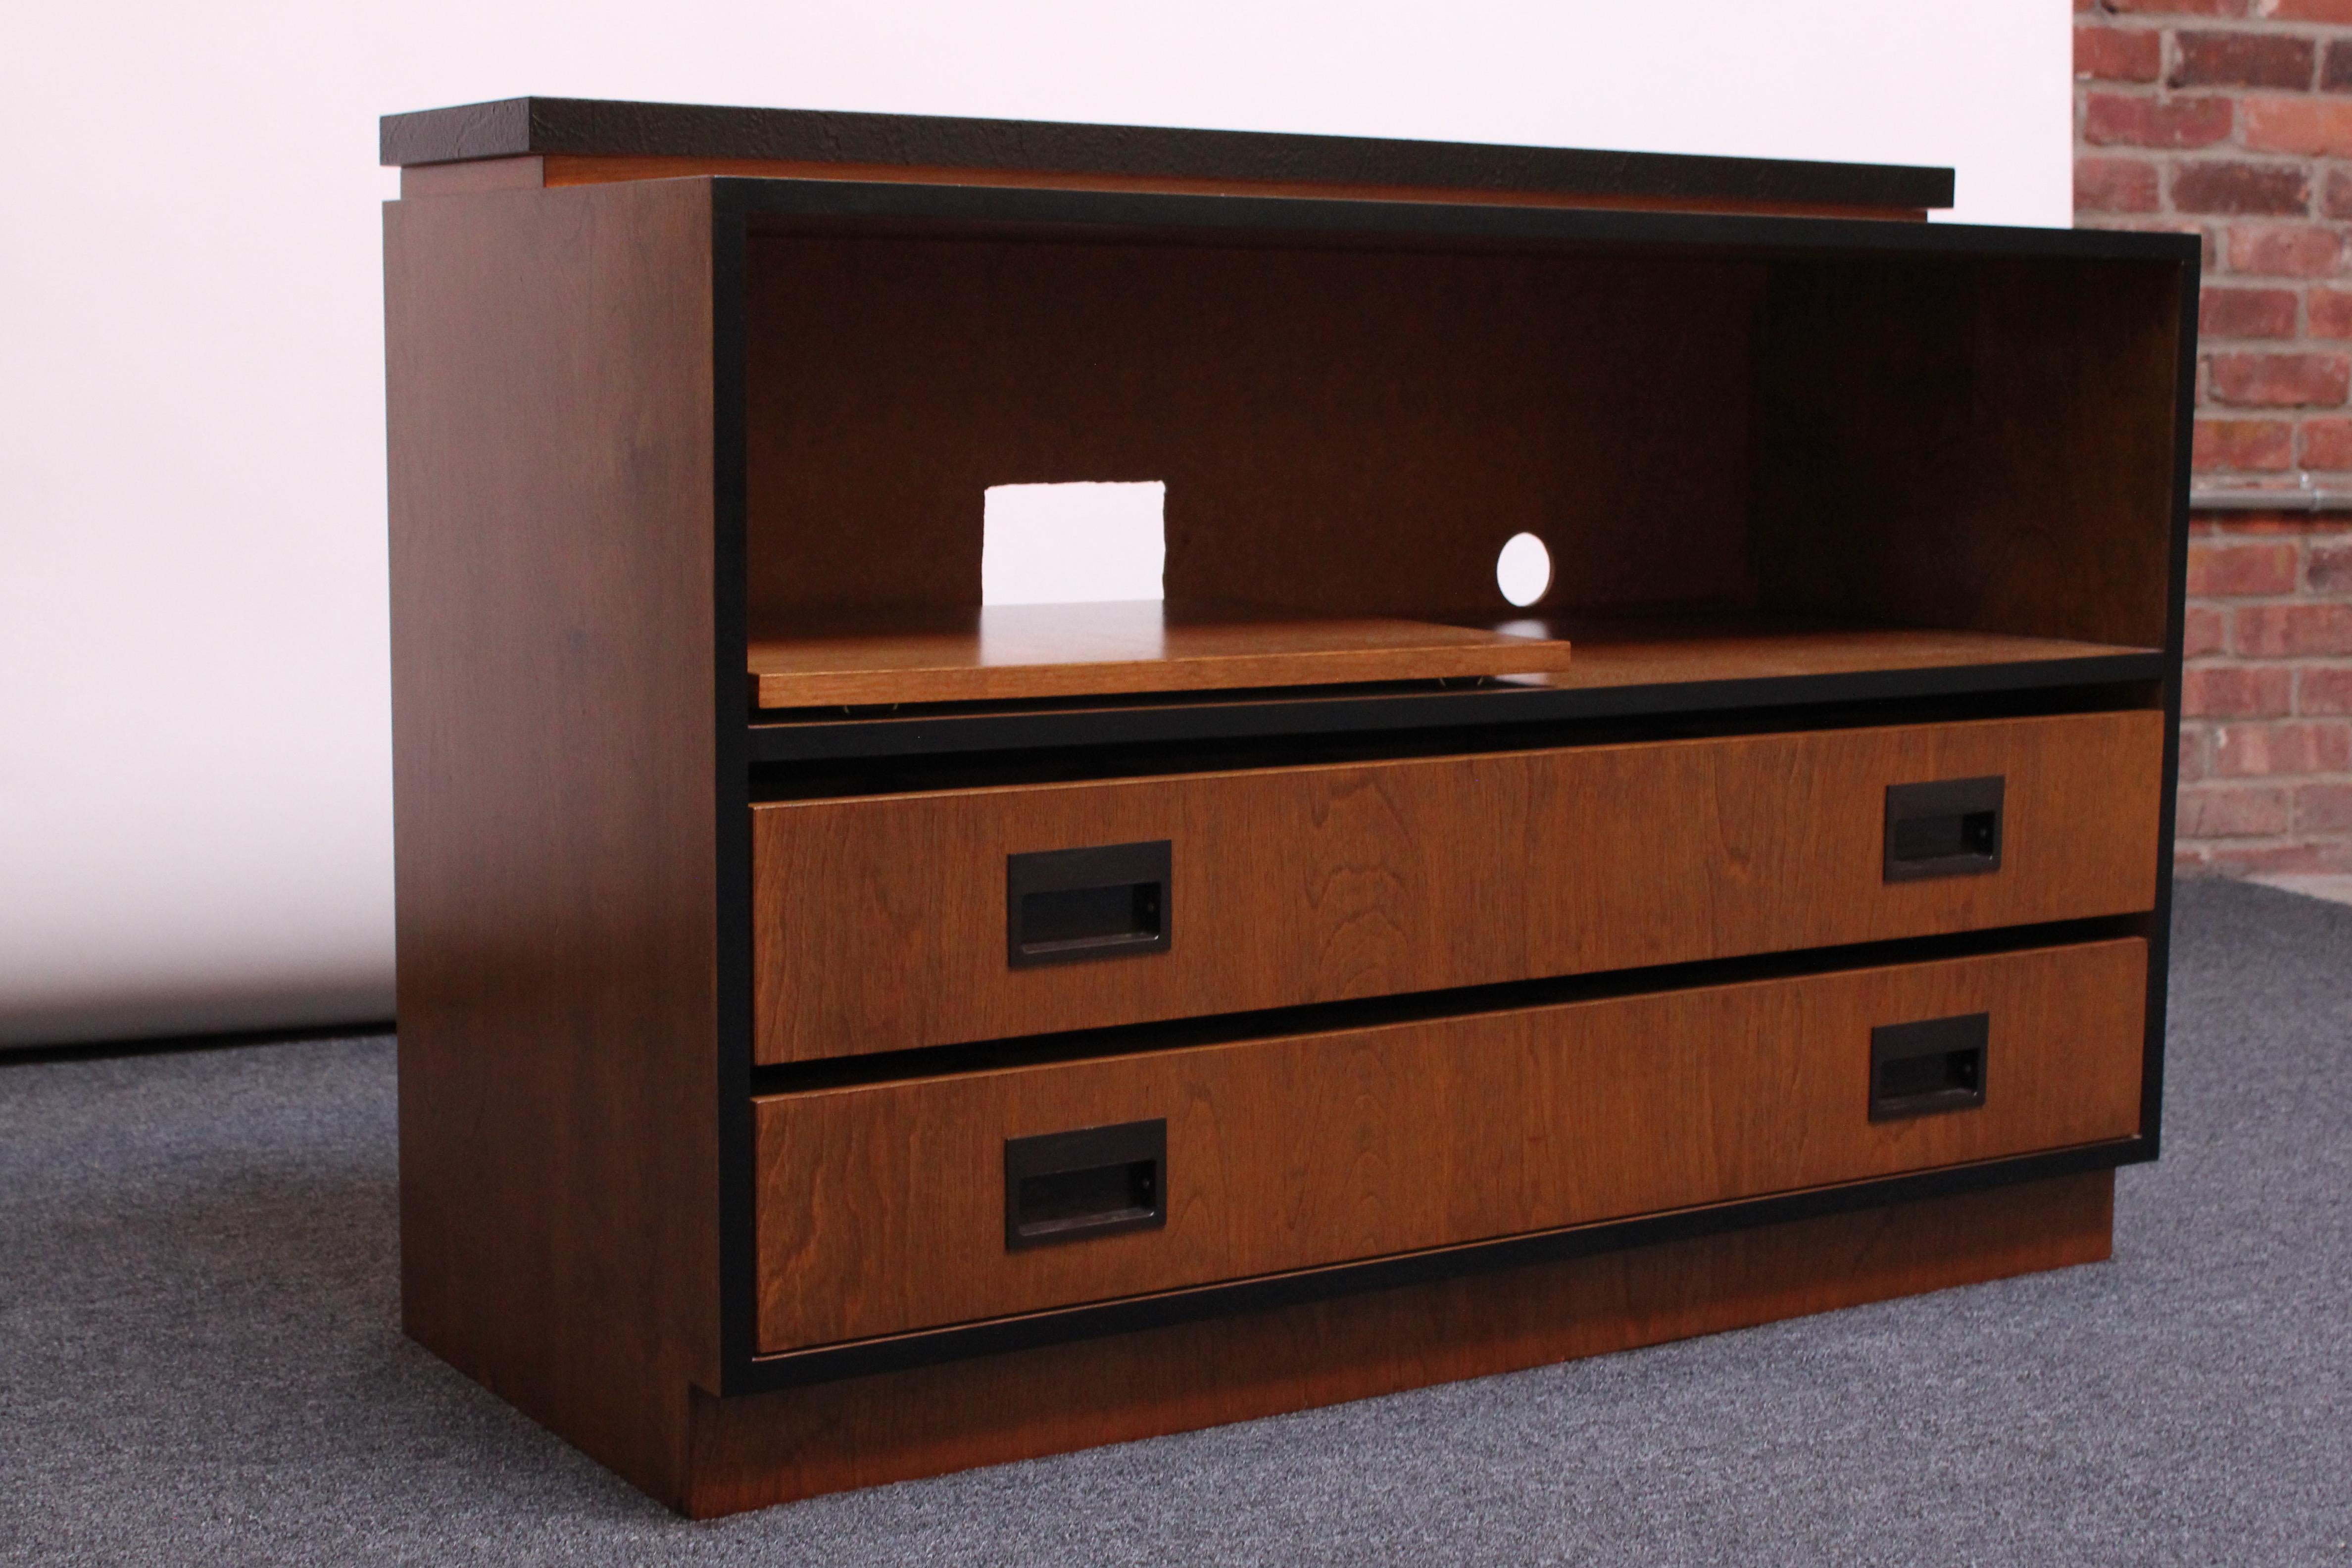 Stylish, compact and highly functional media cabinet / console in walnut with ebonized accents and laminate top tier surface. The two drawers are divided into cubbies, and all but two cubby slats are removable (with one exception, all divisions